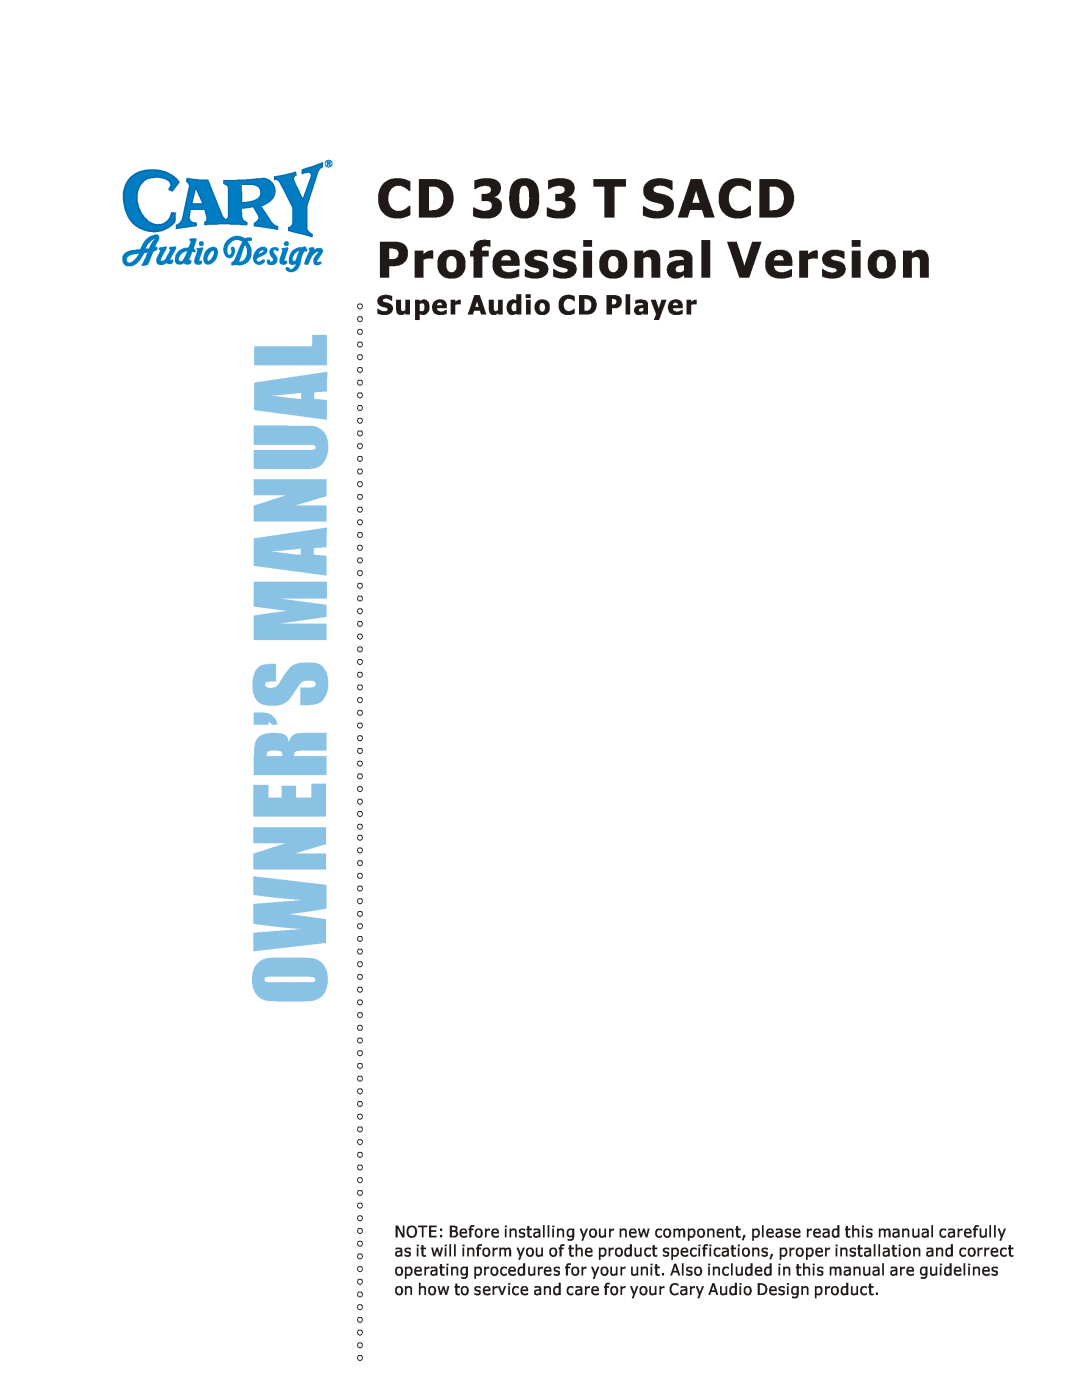 Cary Audio Design CD 303T SACD specifications CD 303 T SACD, Professional Version, Super Audio CD Player 